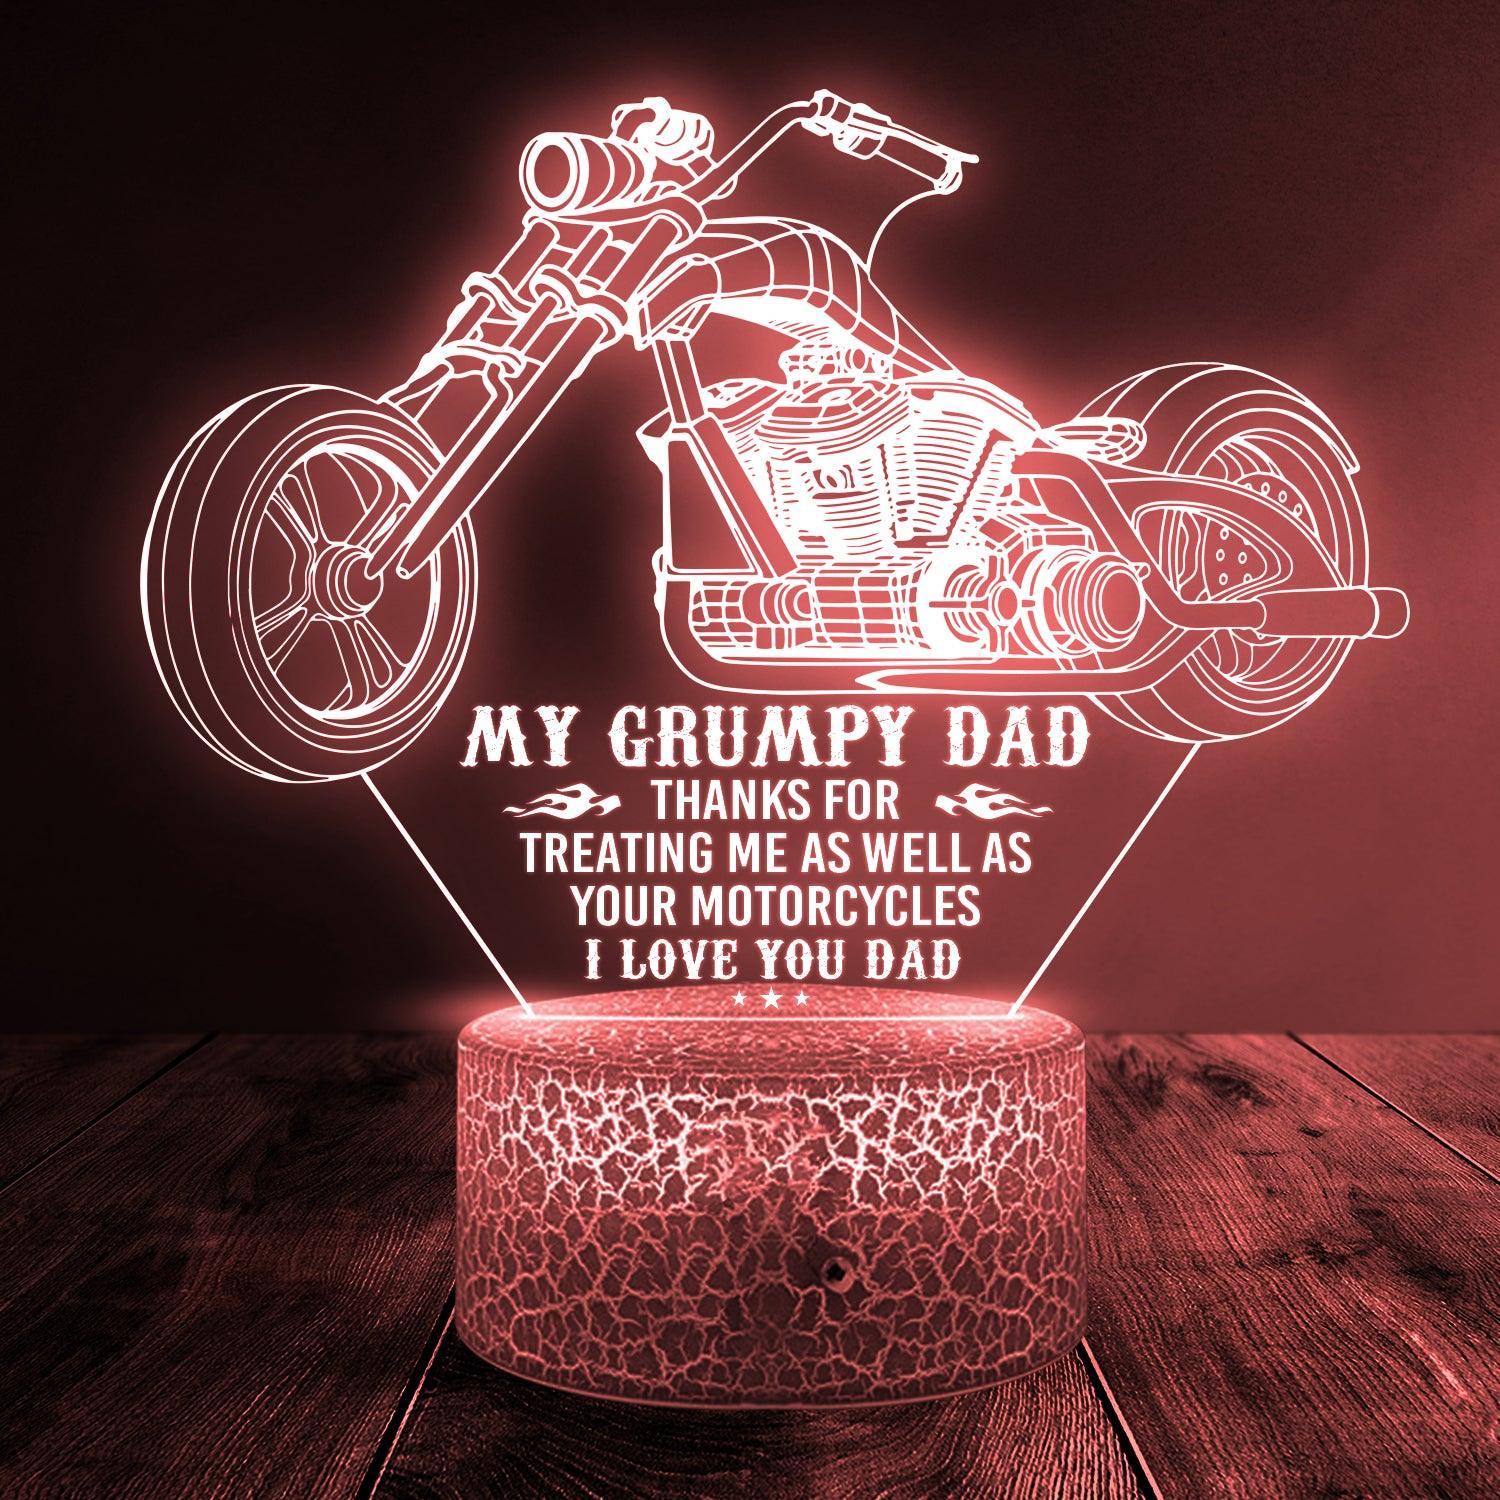 3D Led Light - Biker - My Grumpy Dad - Thanks For Treating Me As Well As Your Motorcycles - Auglca18002 - Gifts Holder